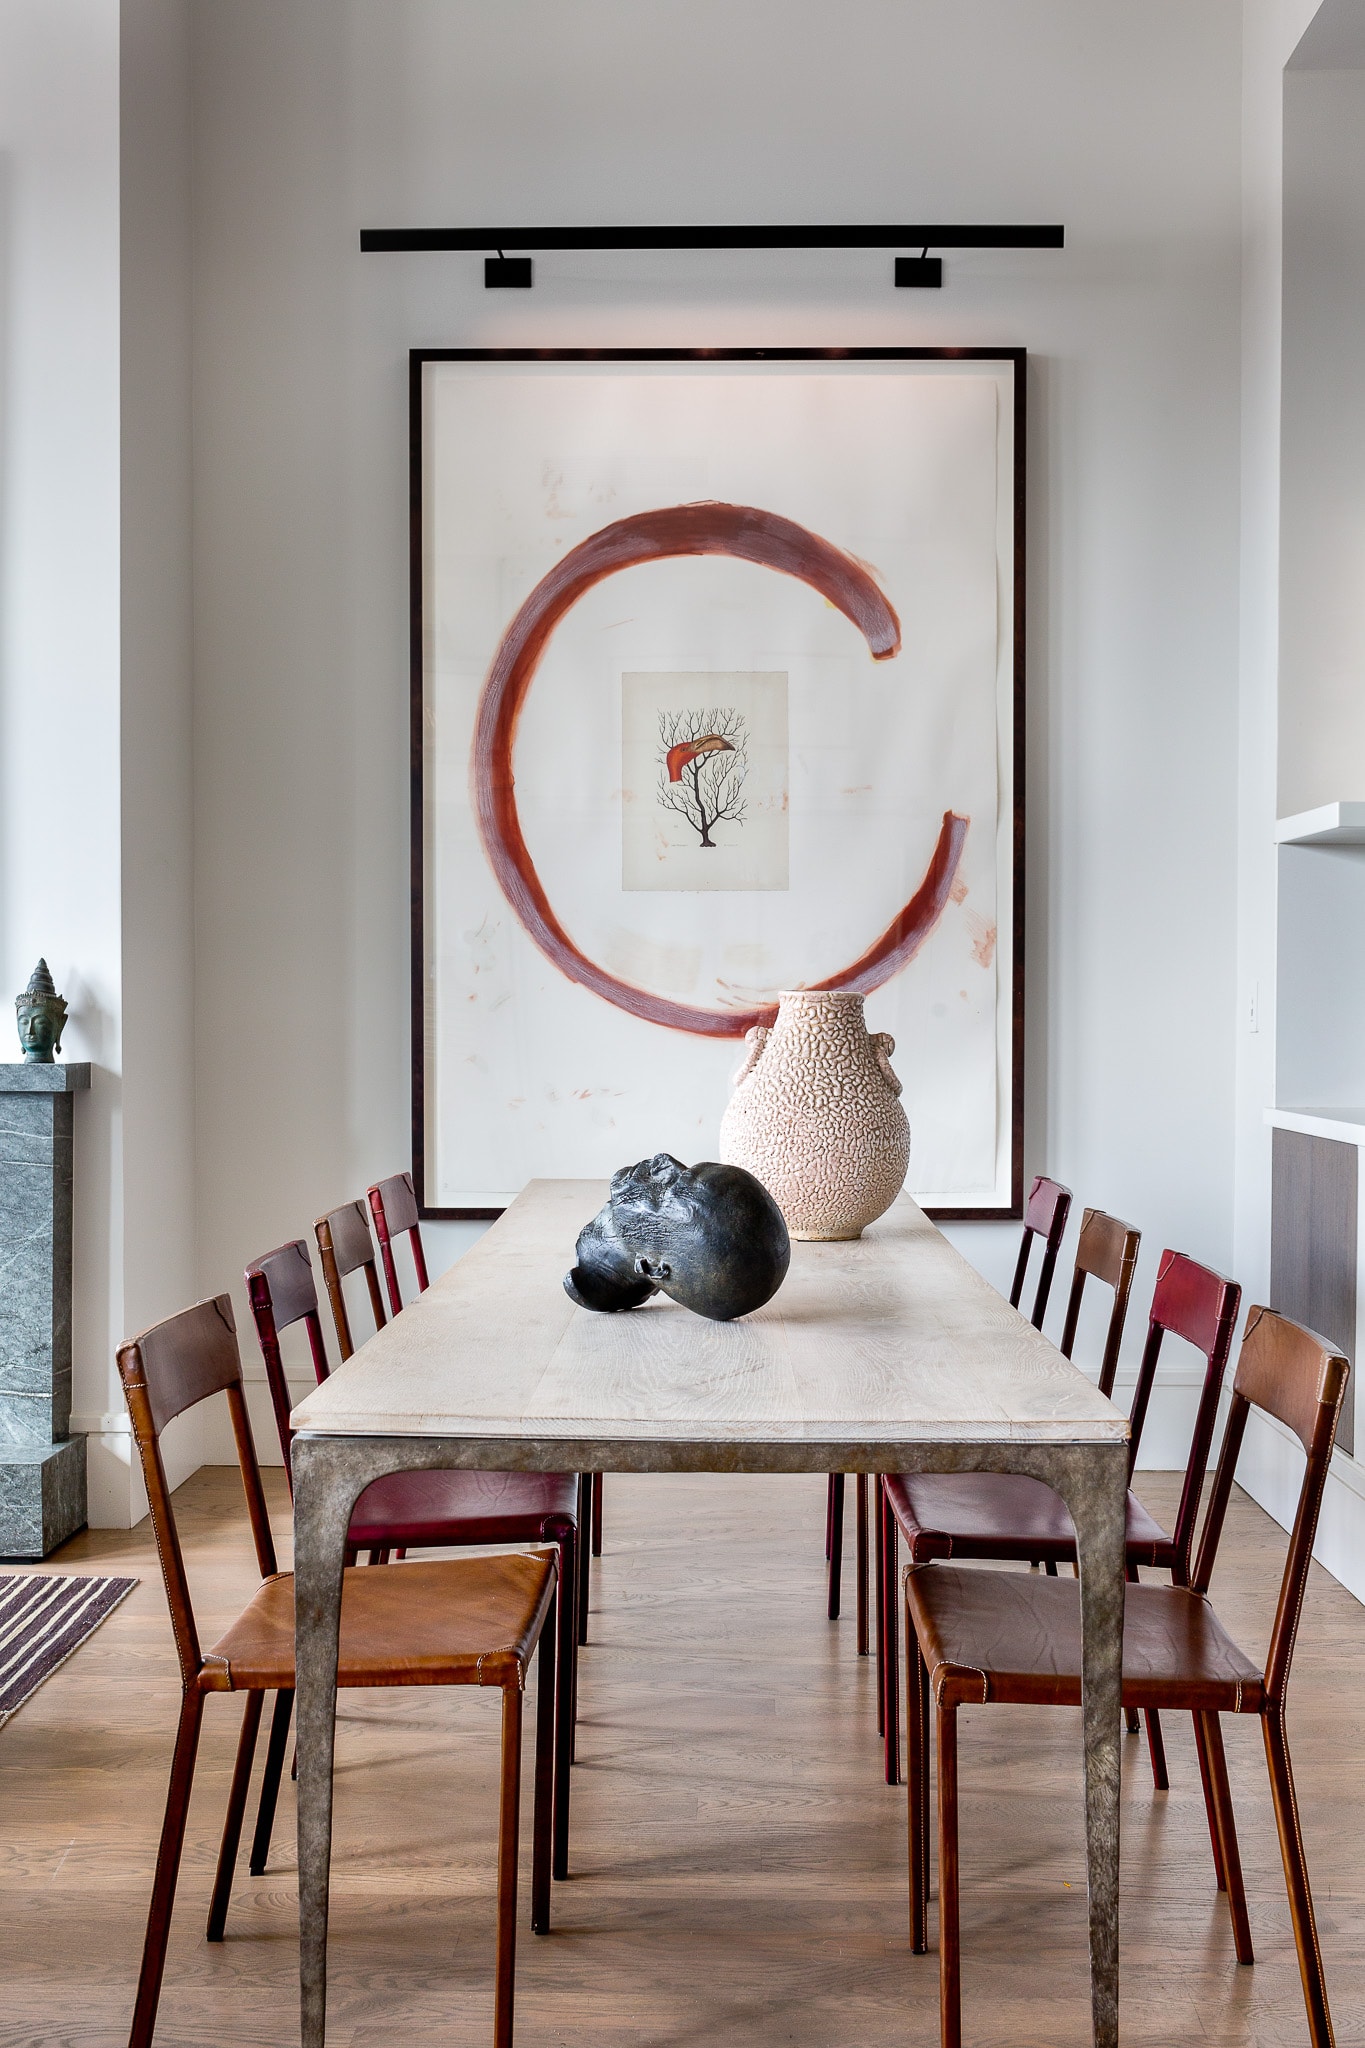 The elevator opens directly into the Dining Room where the large work on paper by artist Julian Schnabel holds court. The delicate lines of the steel and leather chairs and the steel and light wood table create a casual but chic first impression.